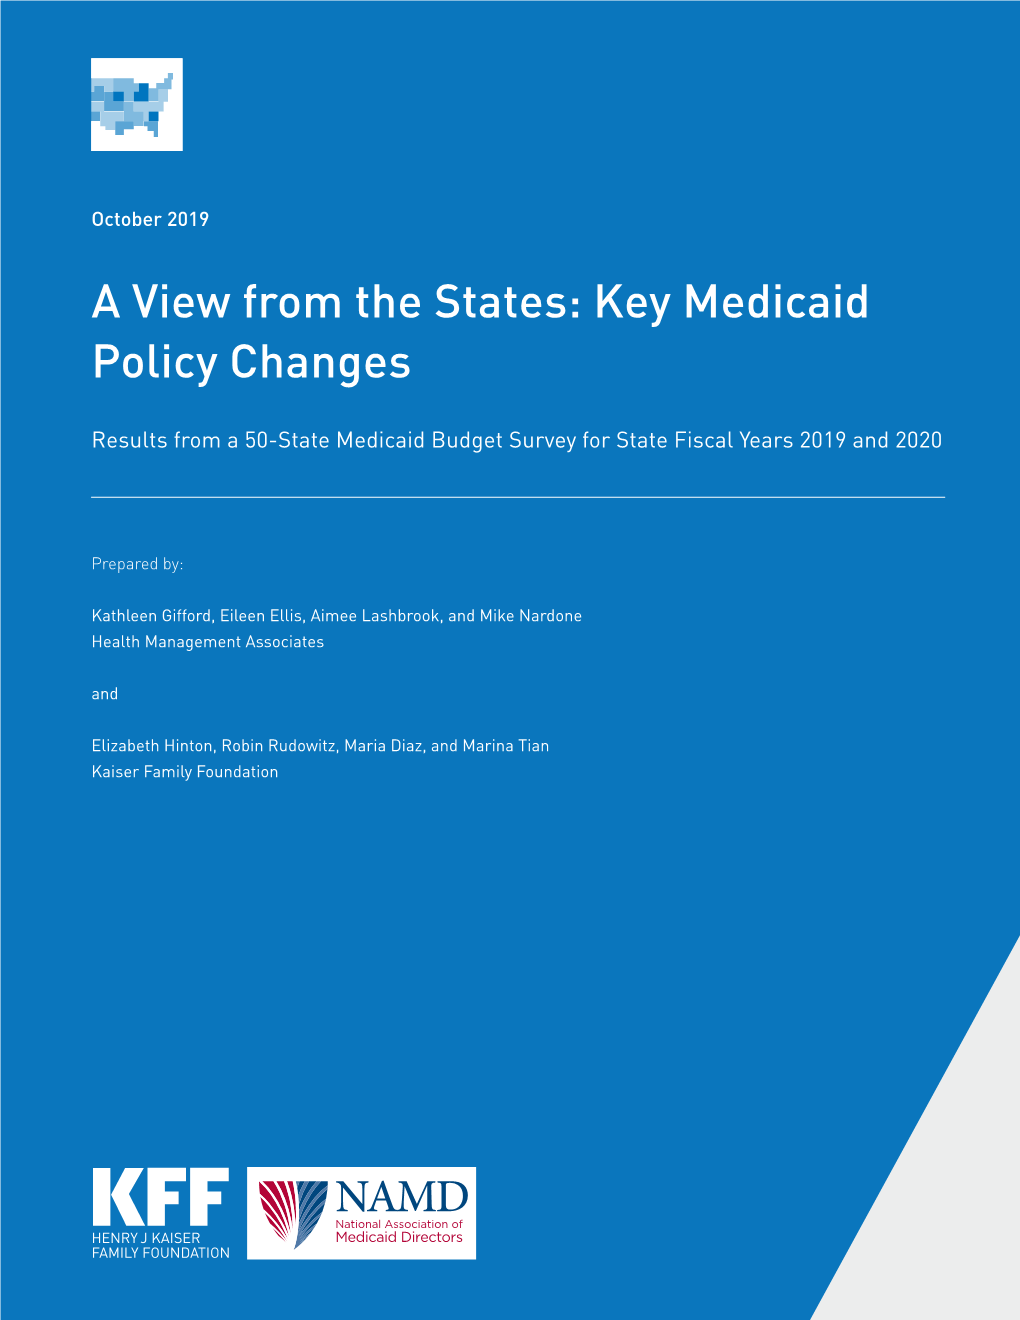 A View from the States: Key Medicaid Policy Changes